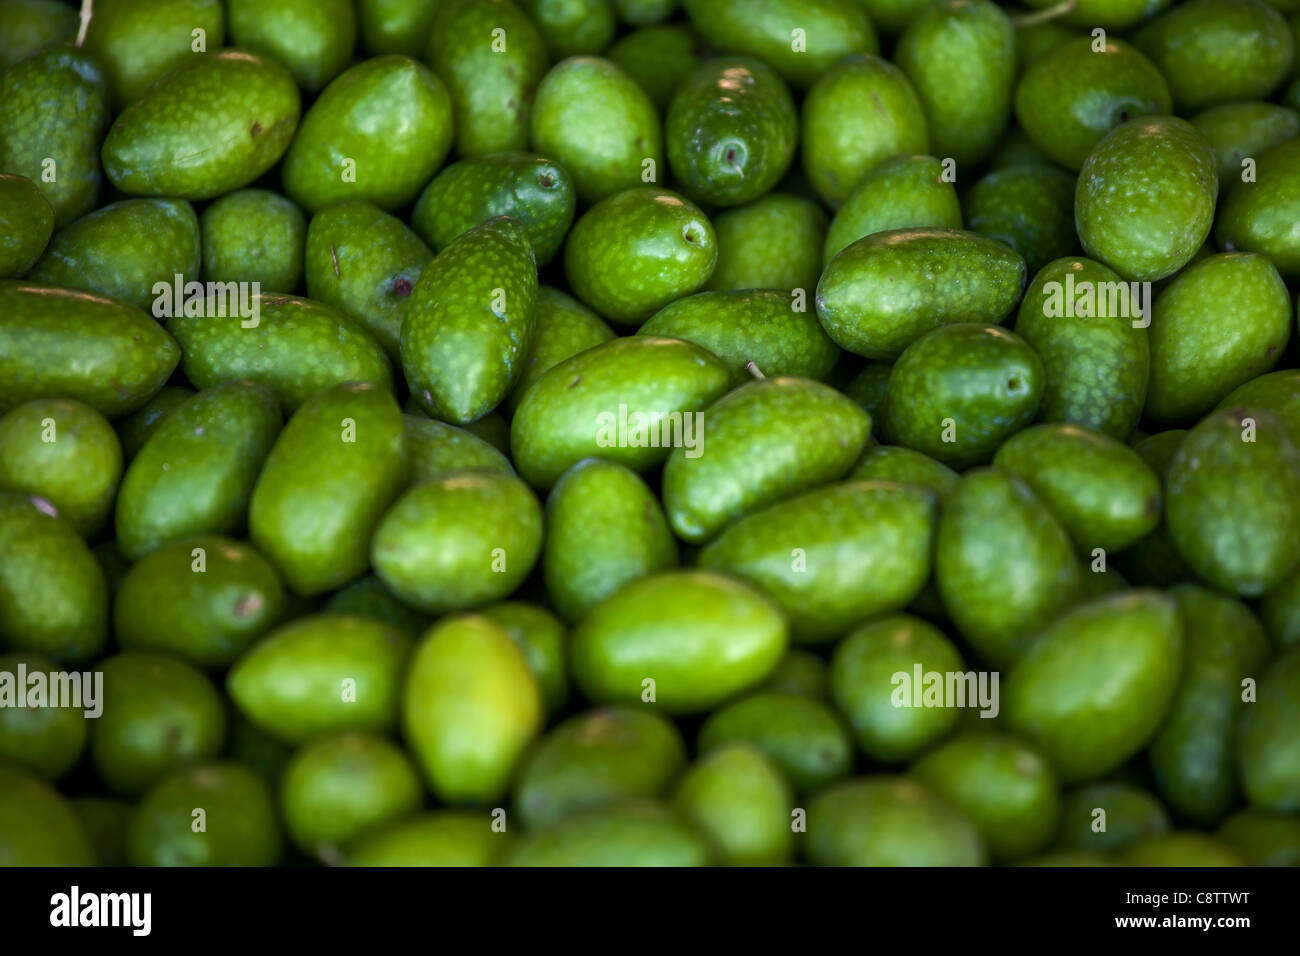 fresh green olives, harvested from the tree Stock Photo